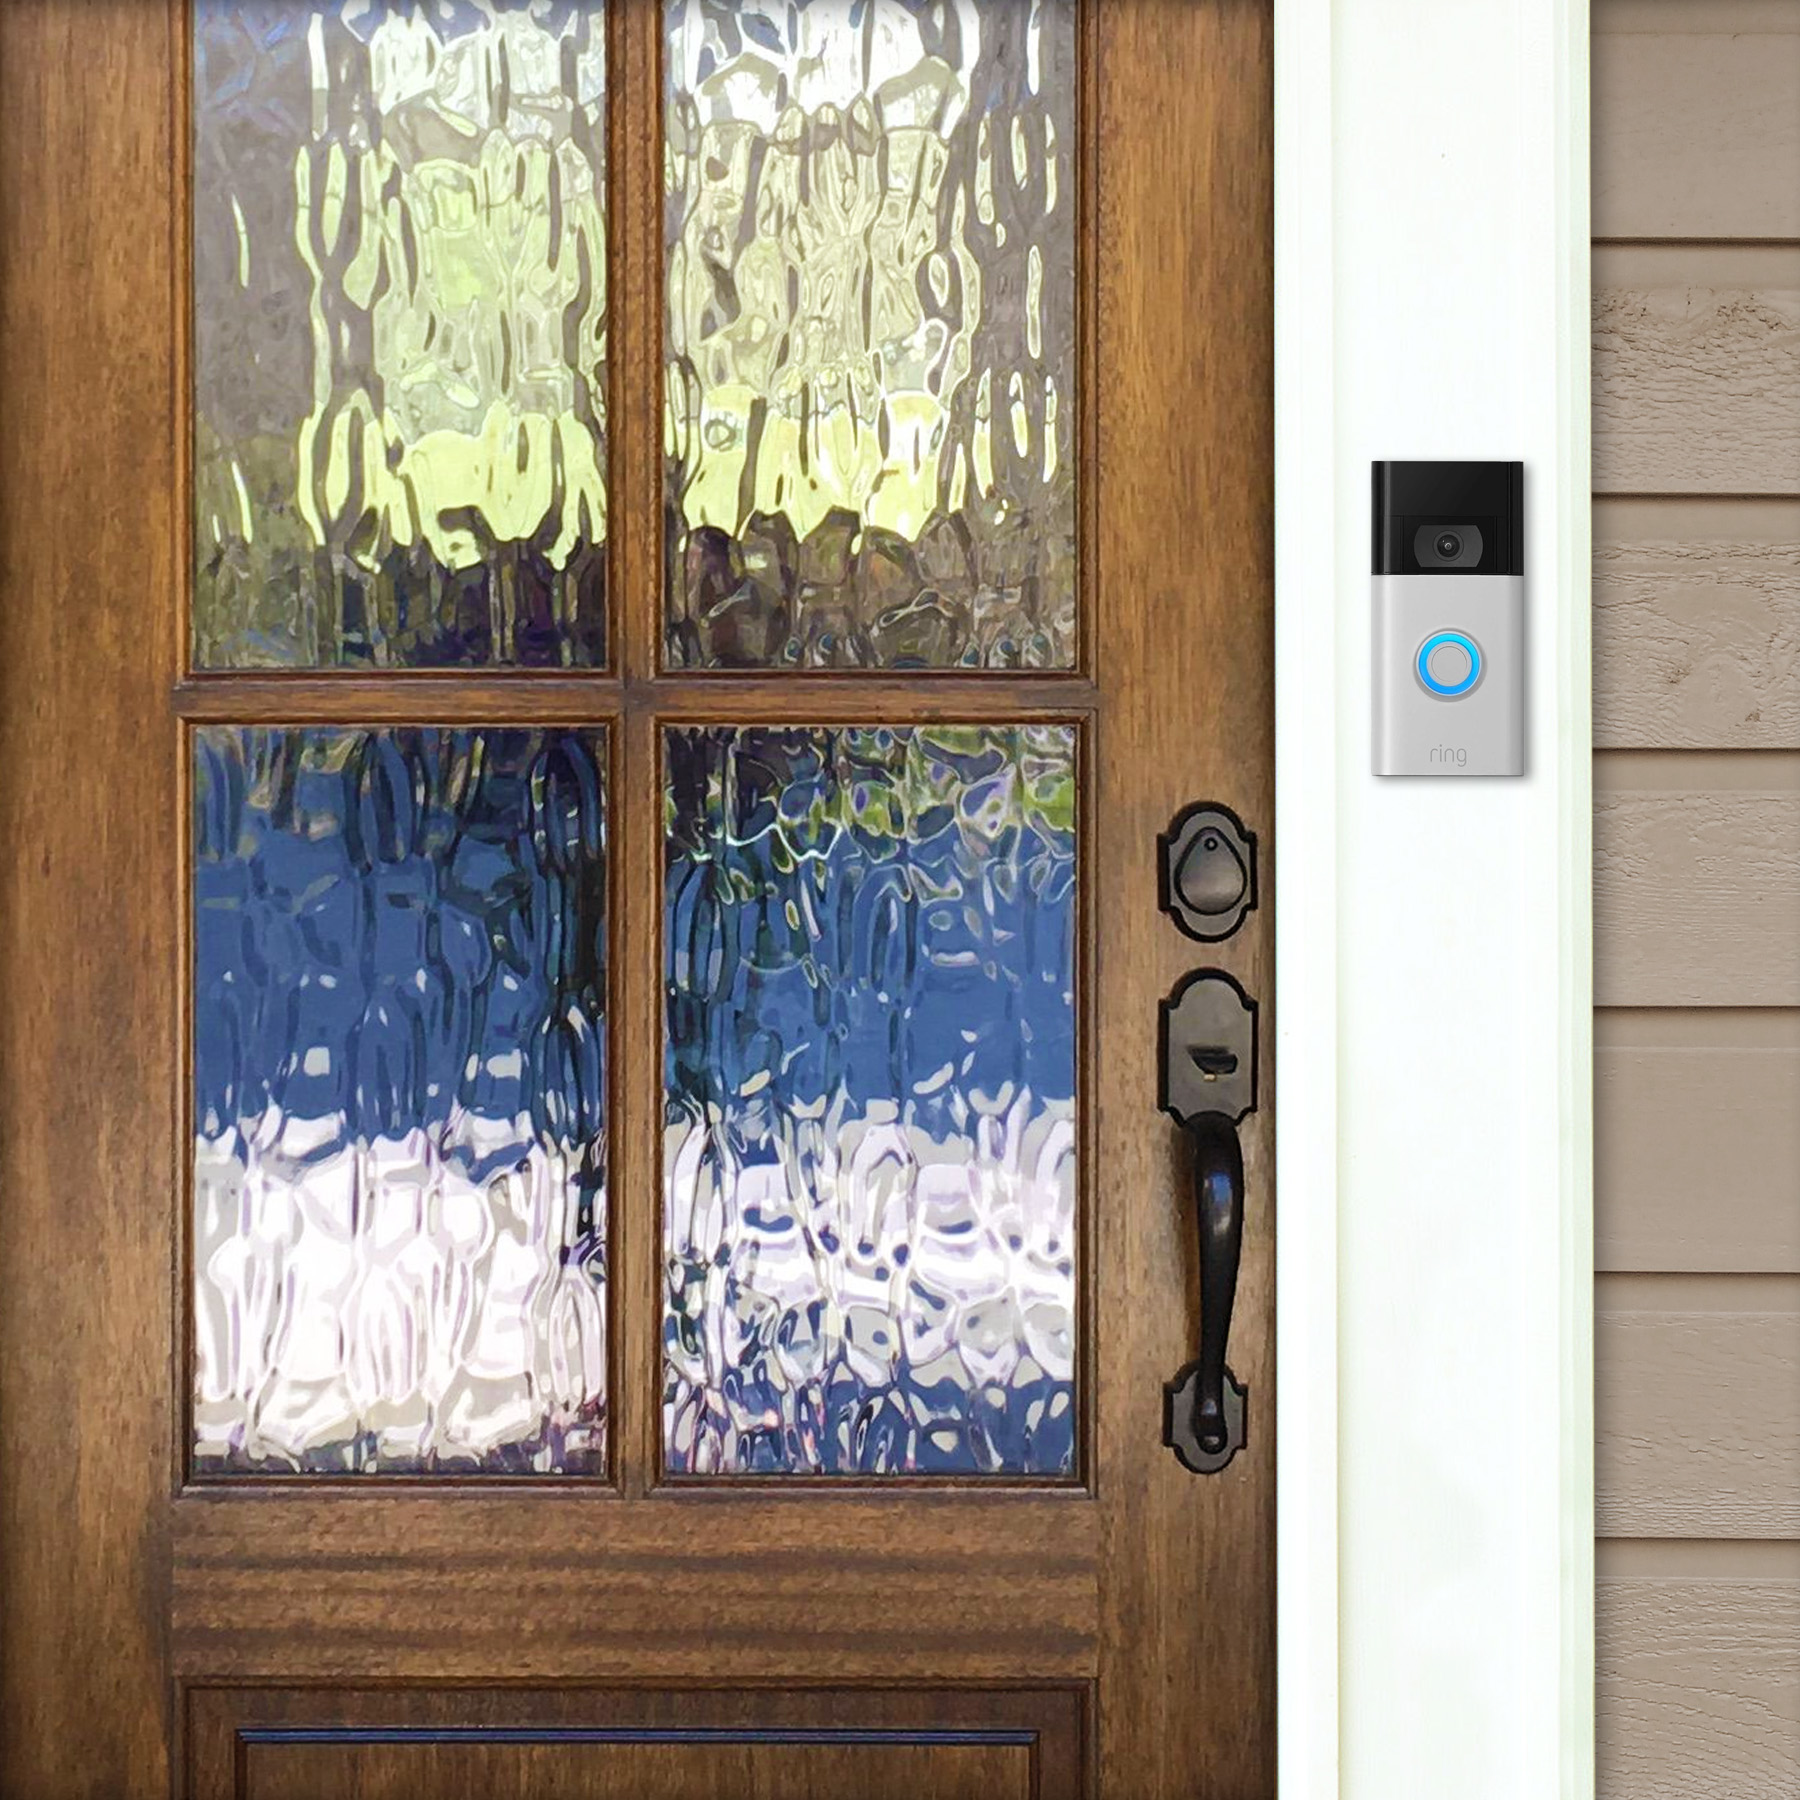 does ring doorbell require a subscription